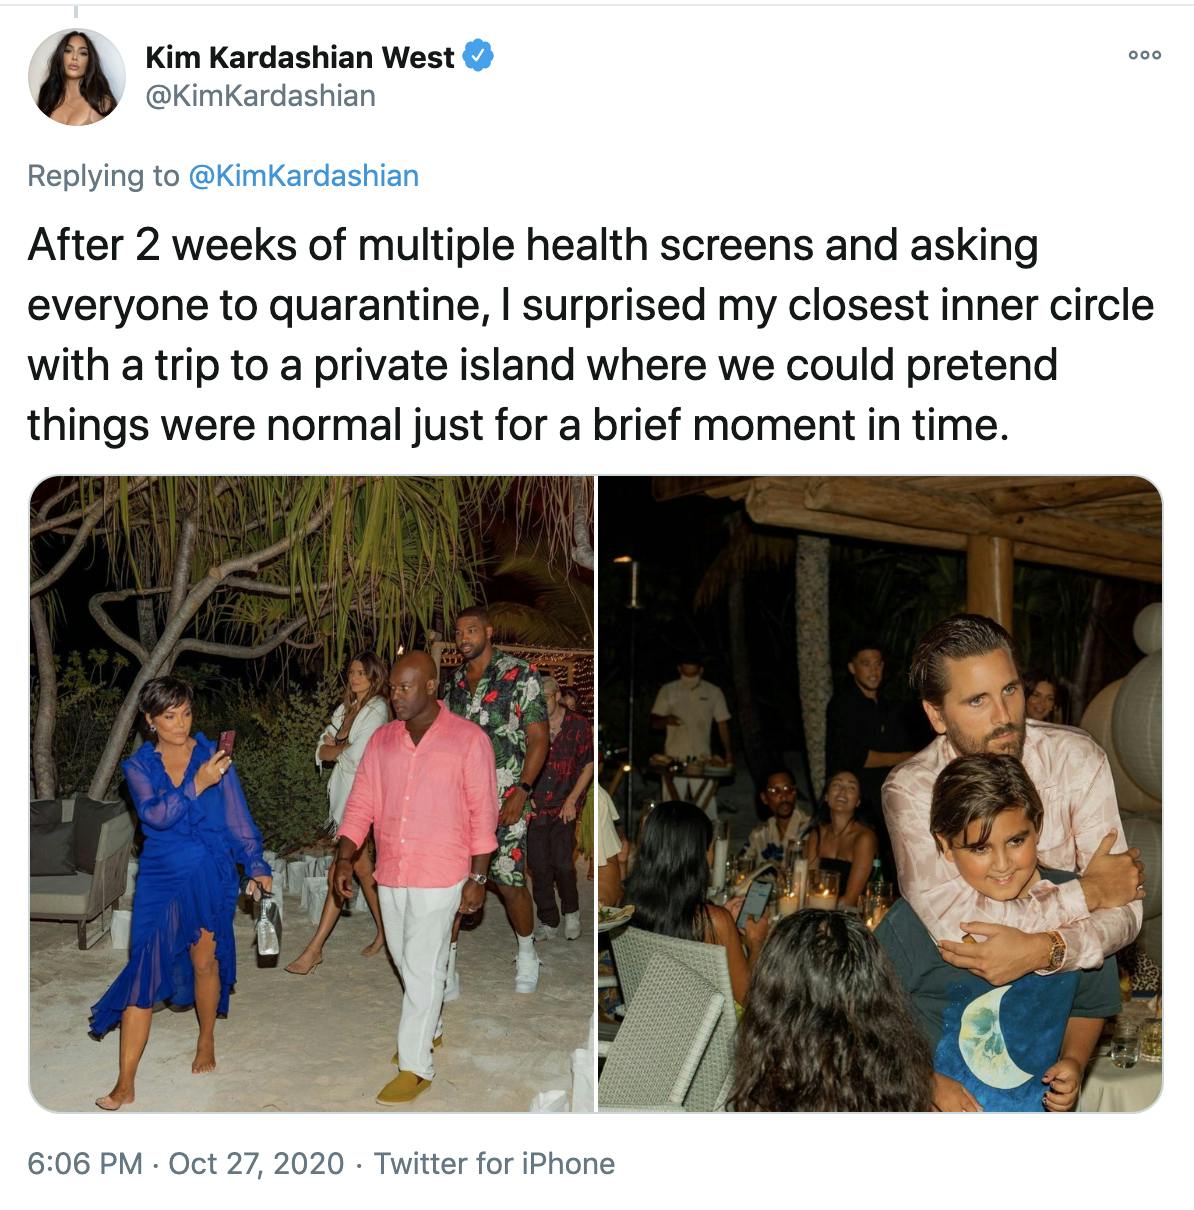 'After 2 weeks of multiple health screens and asking everyone to quarantine, I surprised my closest inner circle with a trip to a private island where we could pretend things were normal just for a brief moment in time.' two pictures of Kim's party guests, one on the beach and one in a bar